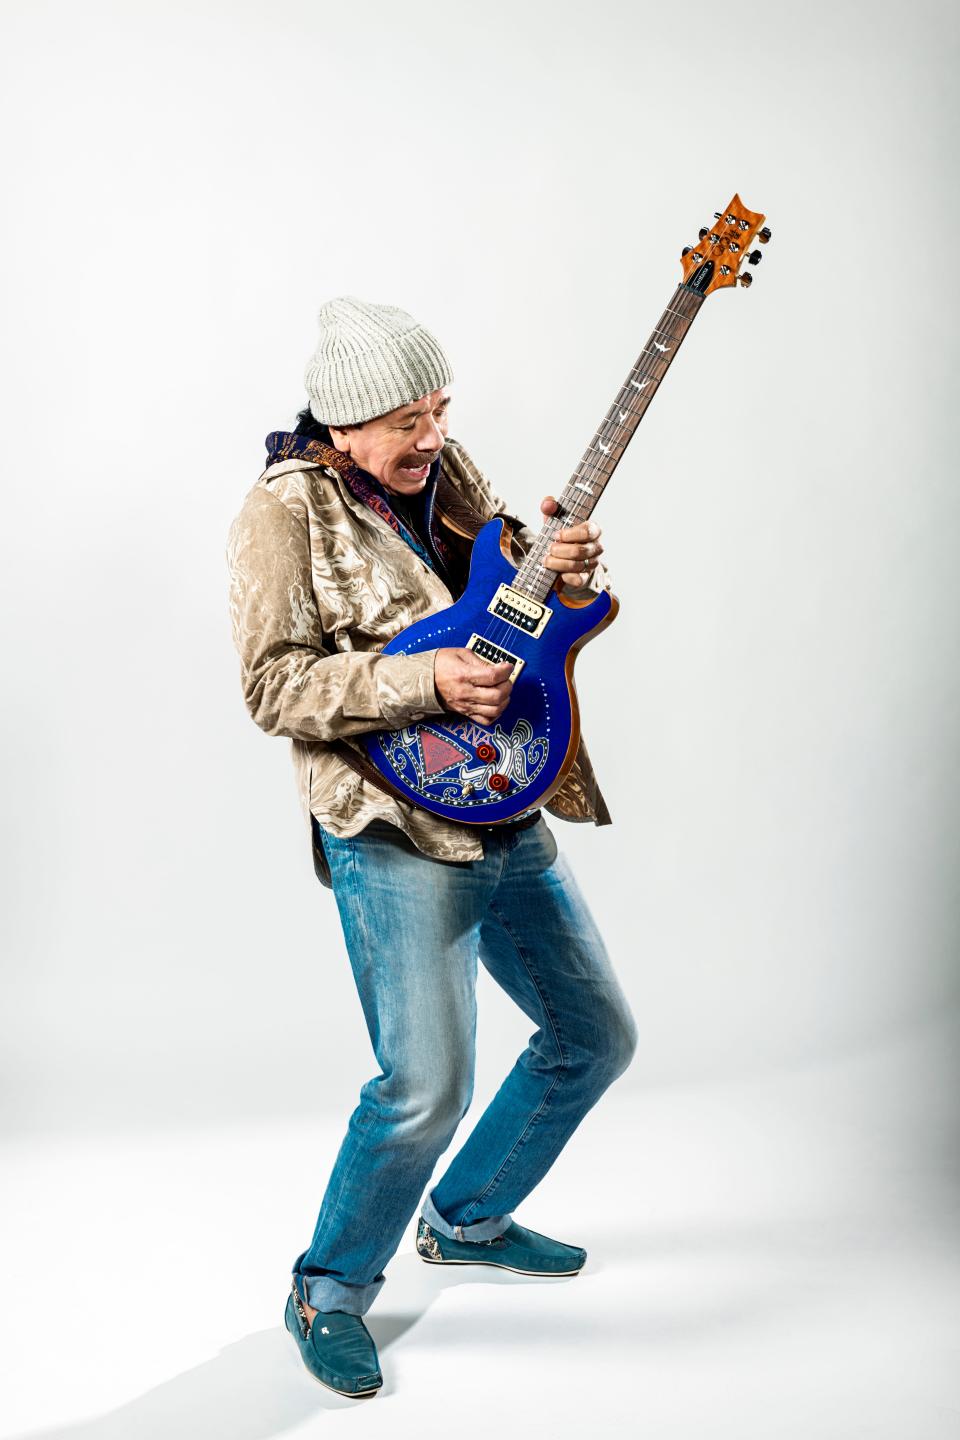 Carlos Santana returns to the road for the 15-date "Blessings and Miracles" tour launching Sept. 11 in Atlantic City.